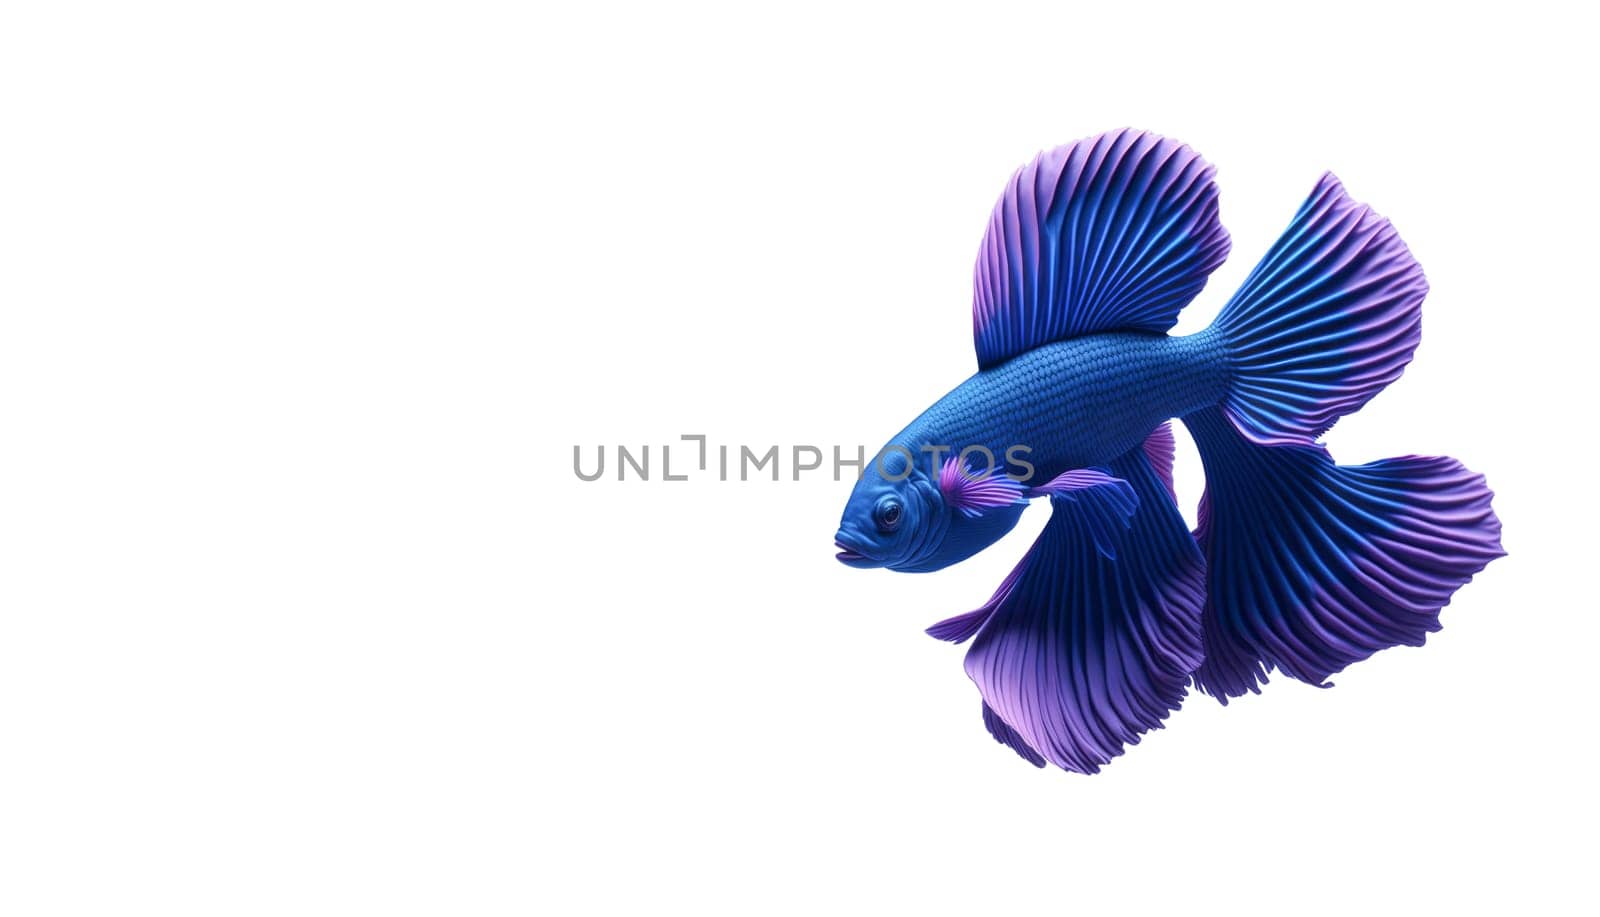 Beautiful colorful blue and purple fantasy beta fish on white background. Aquarium tropical fish. Space for text. by JuliaDorian